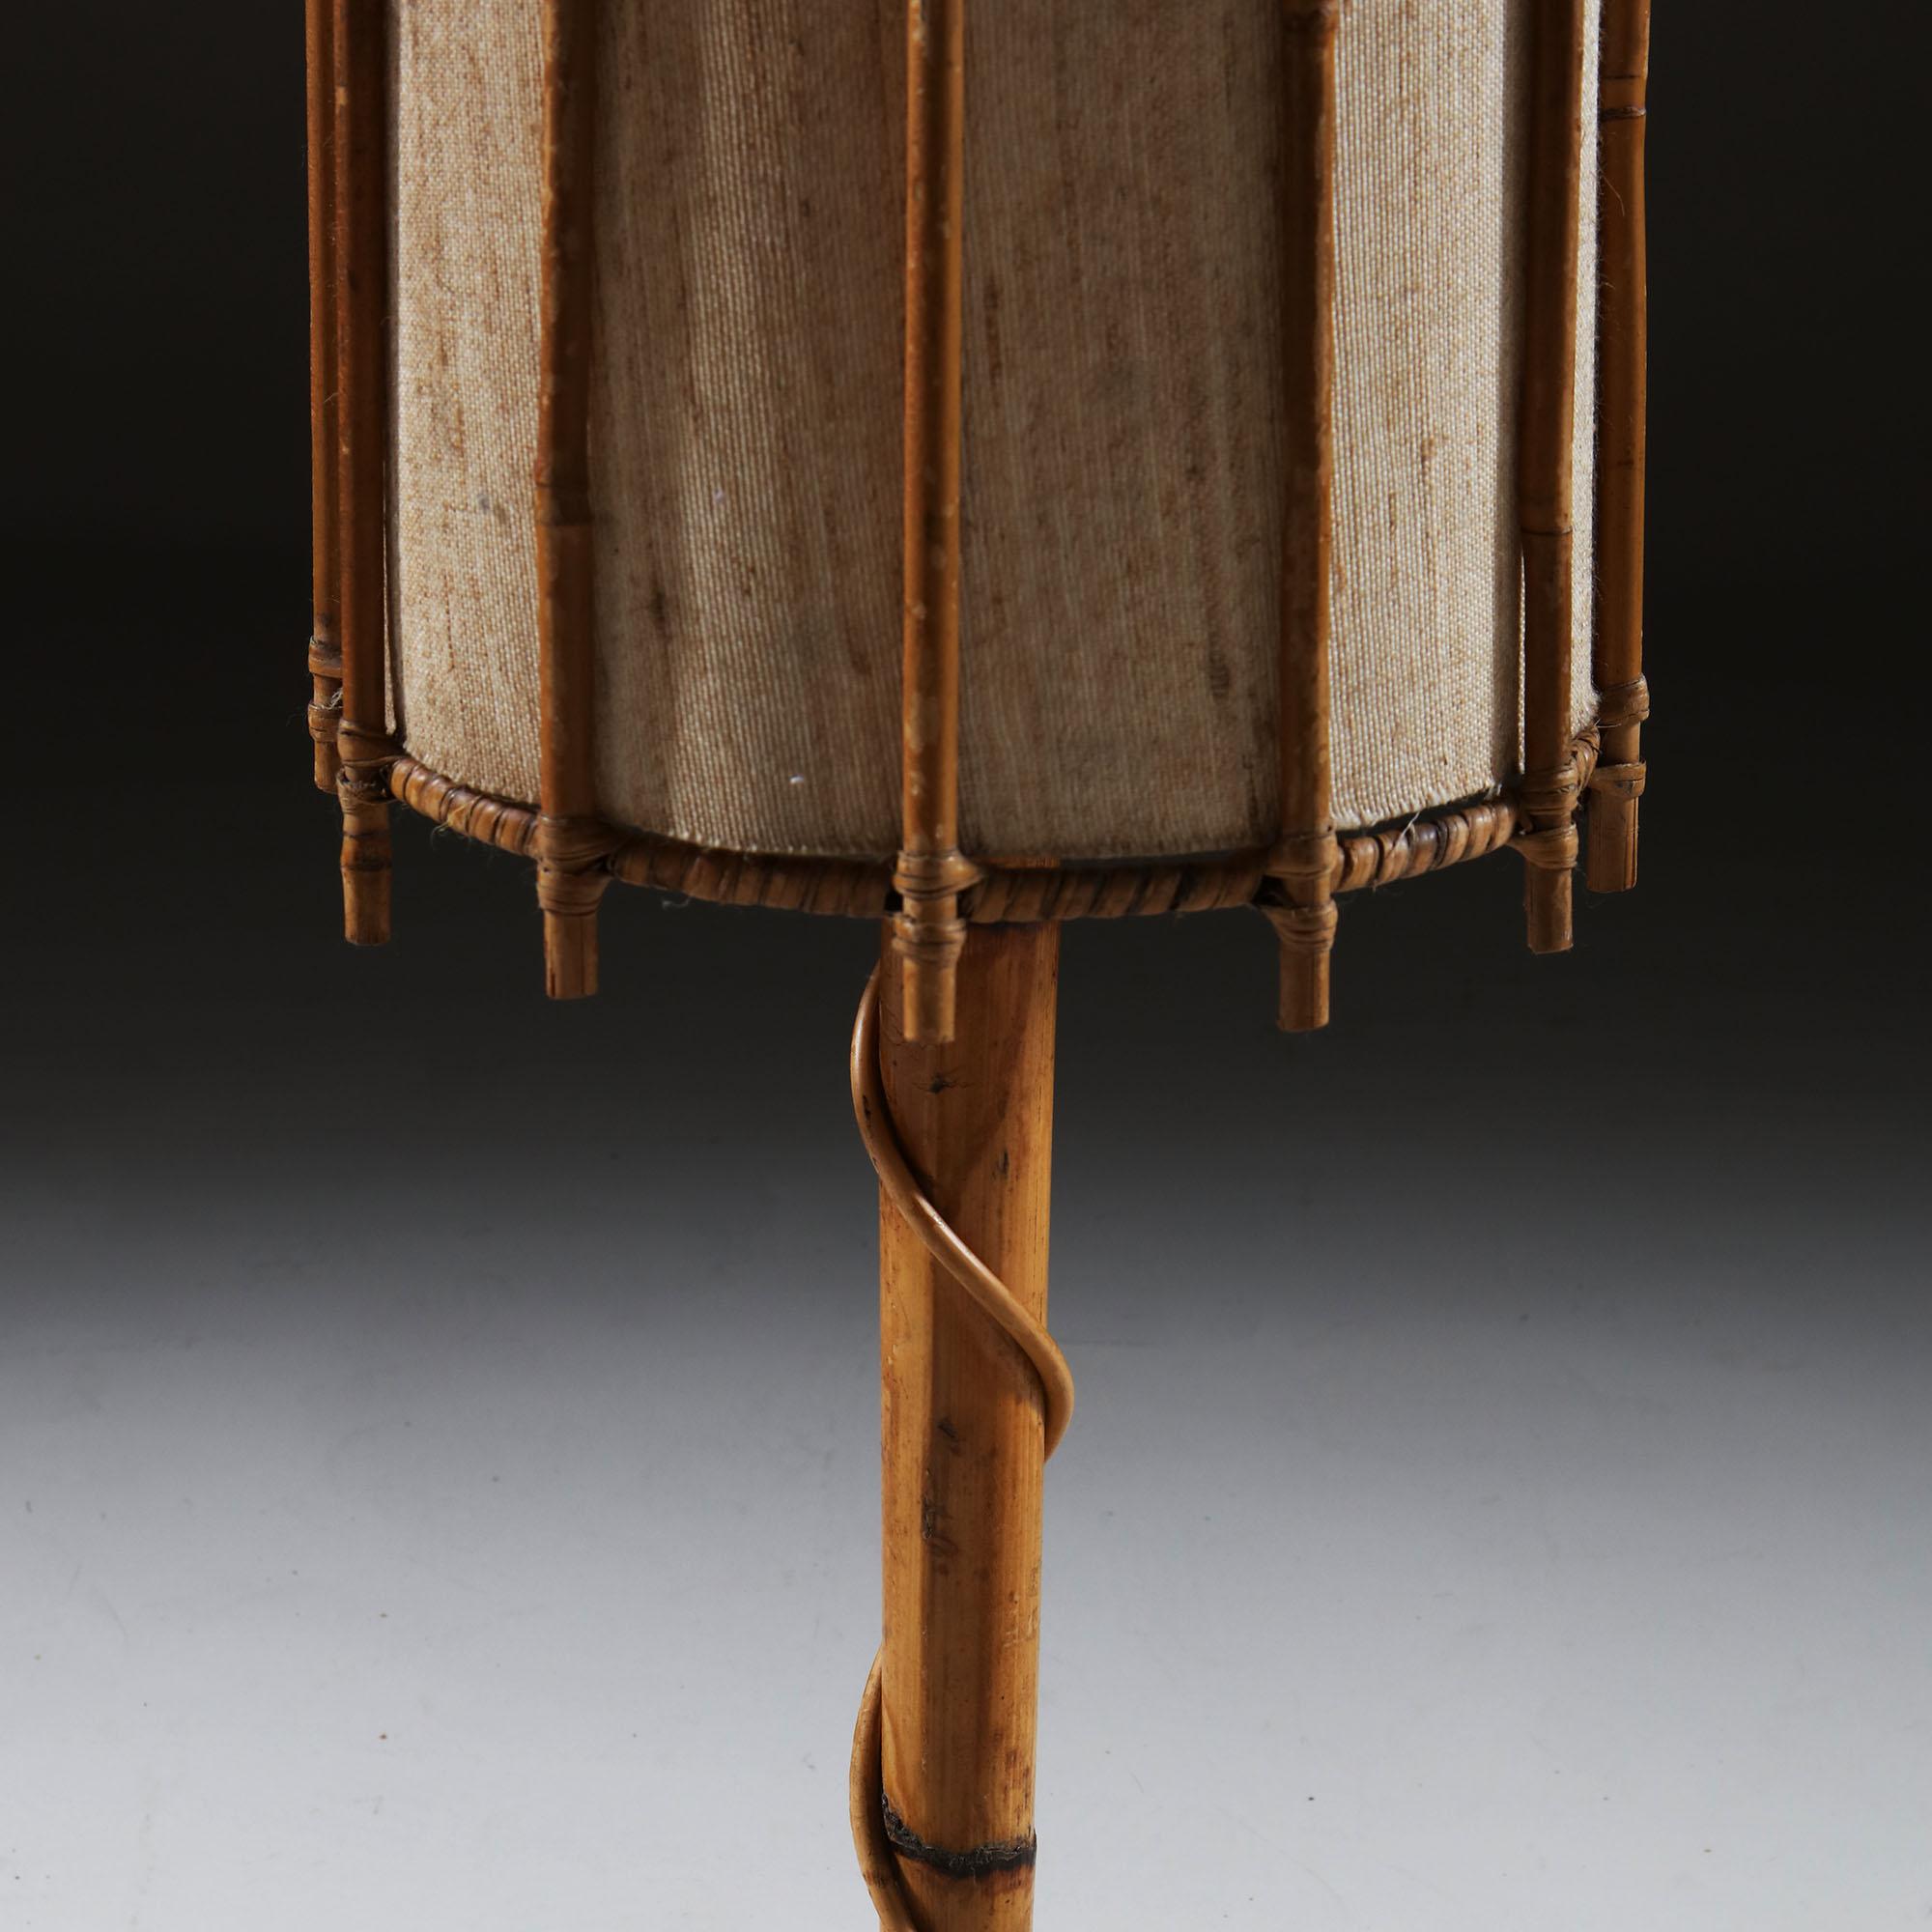 An unusual bamboo lamp, with spiral bamboo base, one strand climbing the central stem in imitation of a vine, surmounted by a tall conical shade.